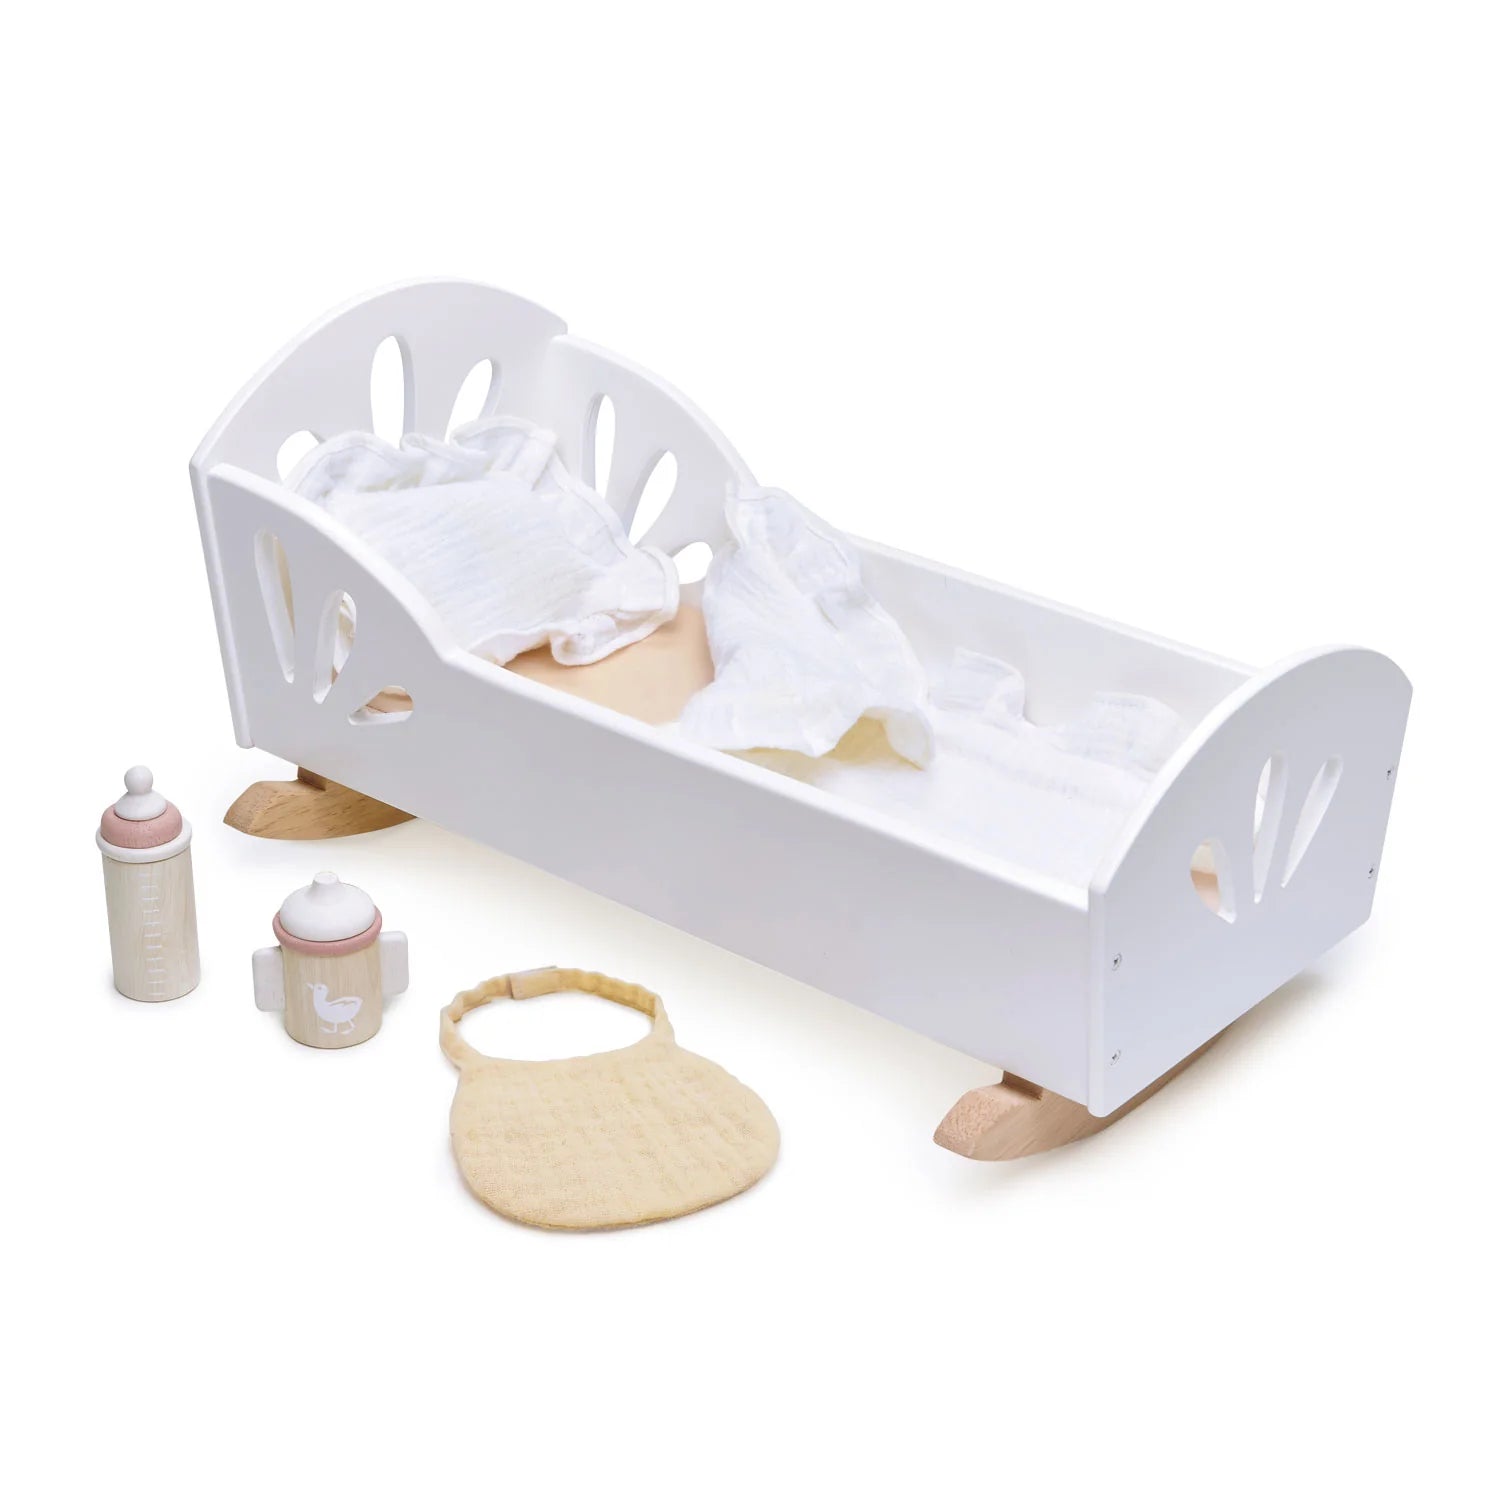 tender leaf toys white wooden cots with bedding and accessories